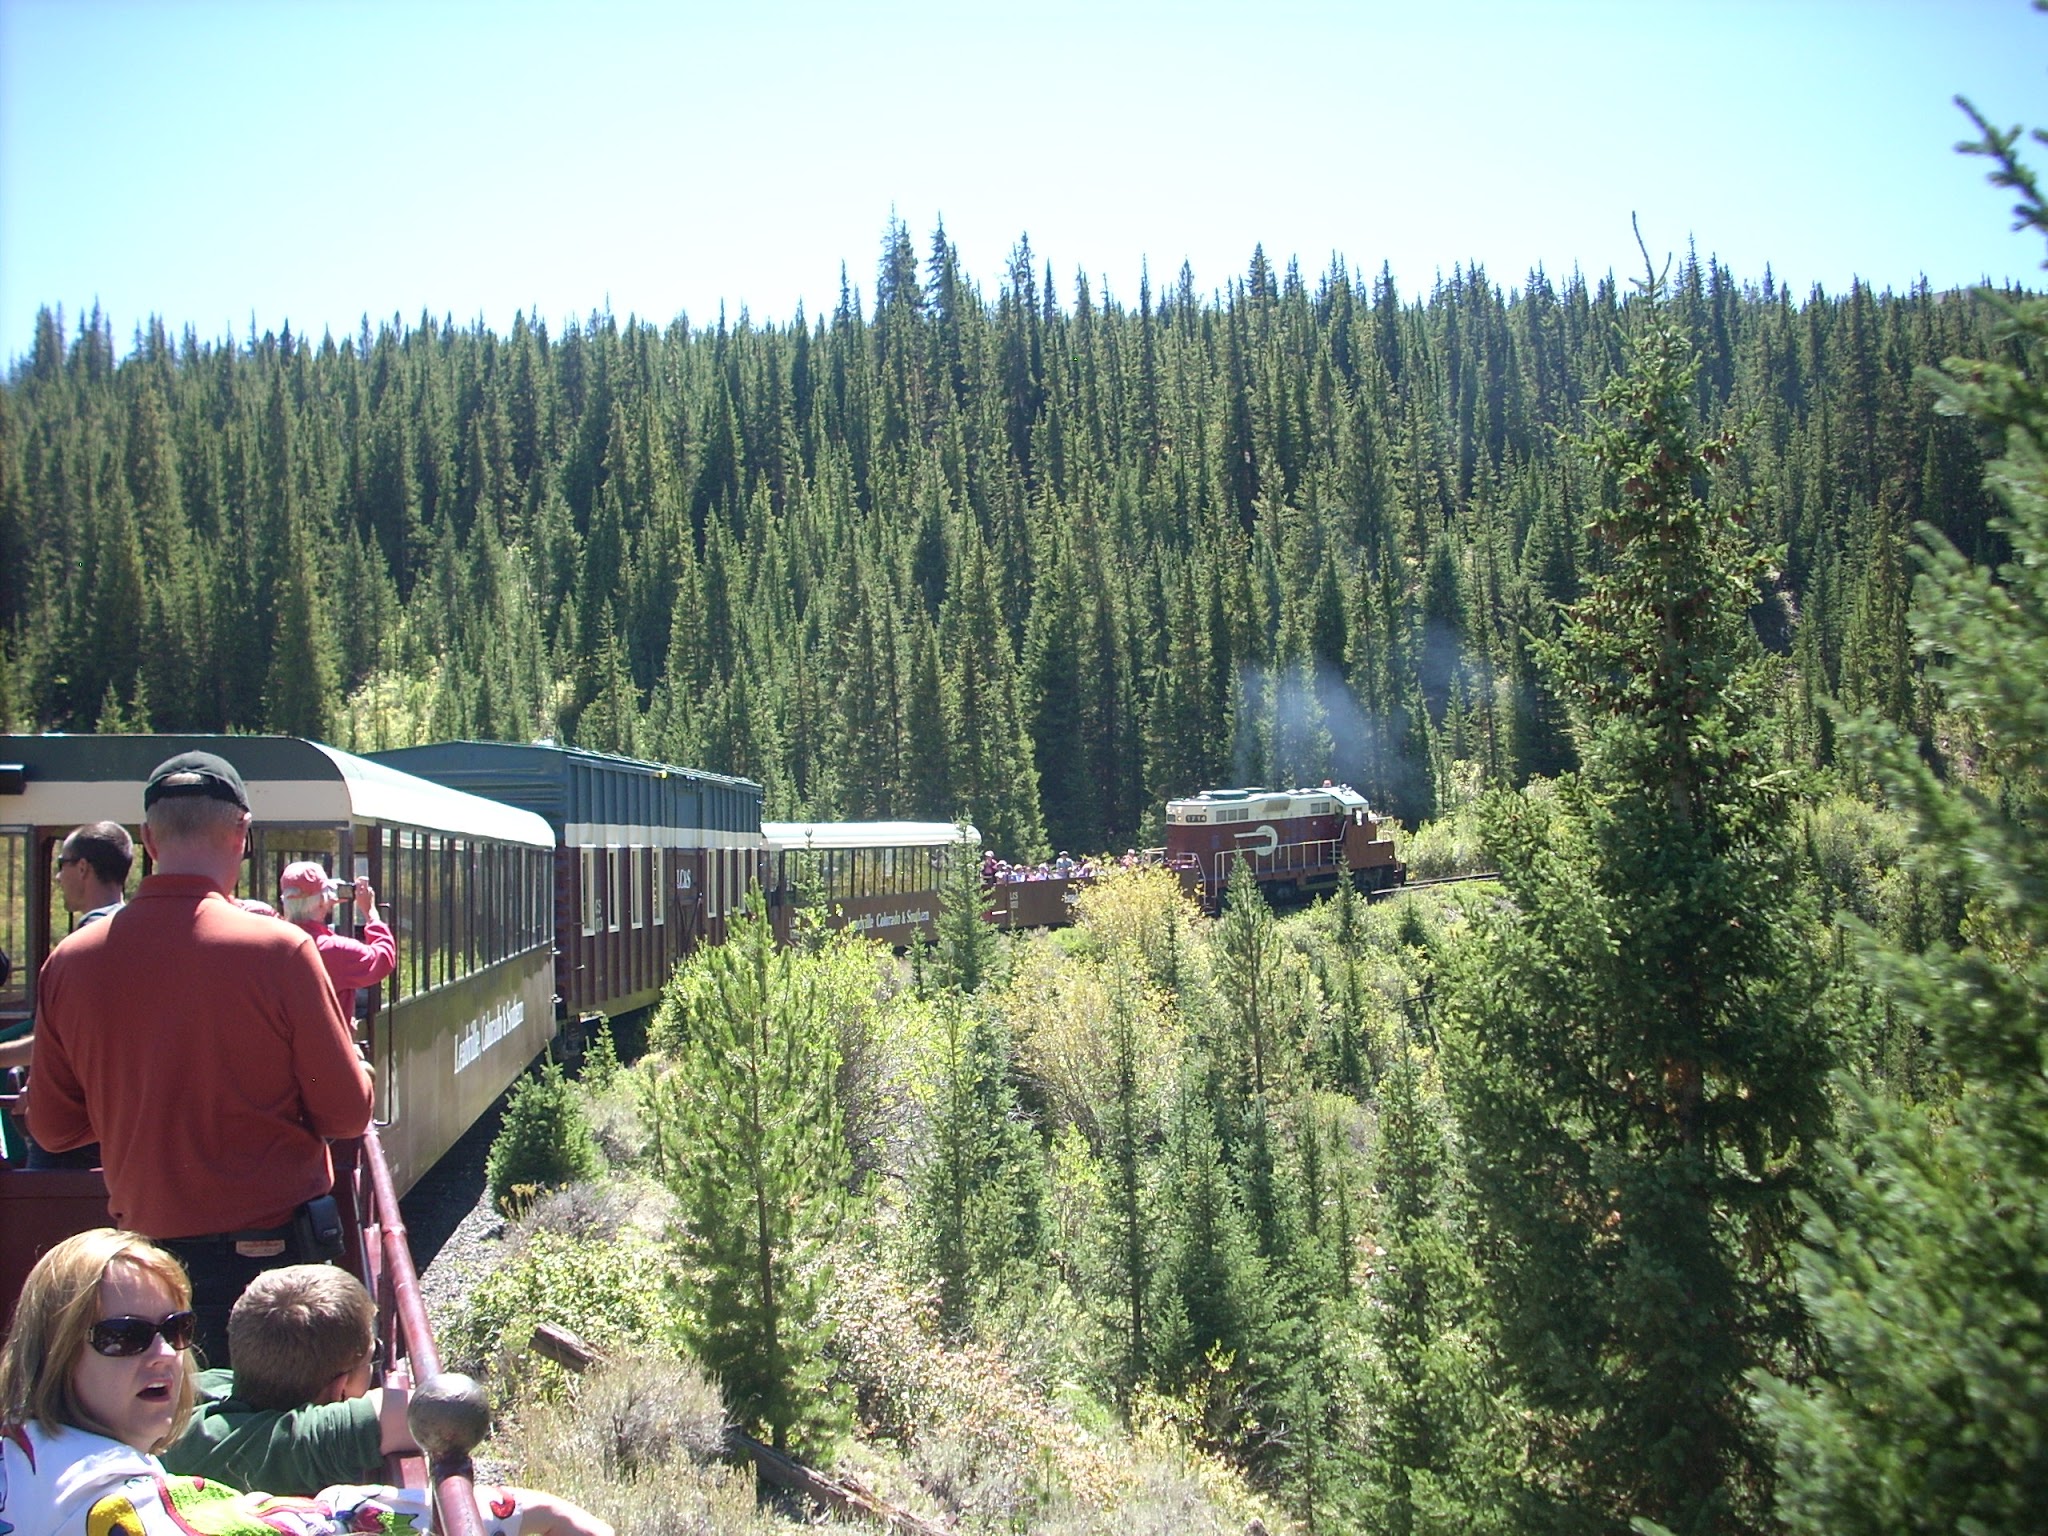 Passenger train ride along a mountain curve, with passengers taking photos and kids look out at the forest.